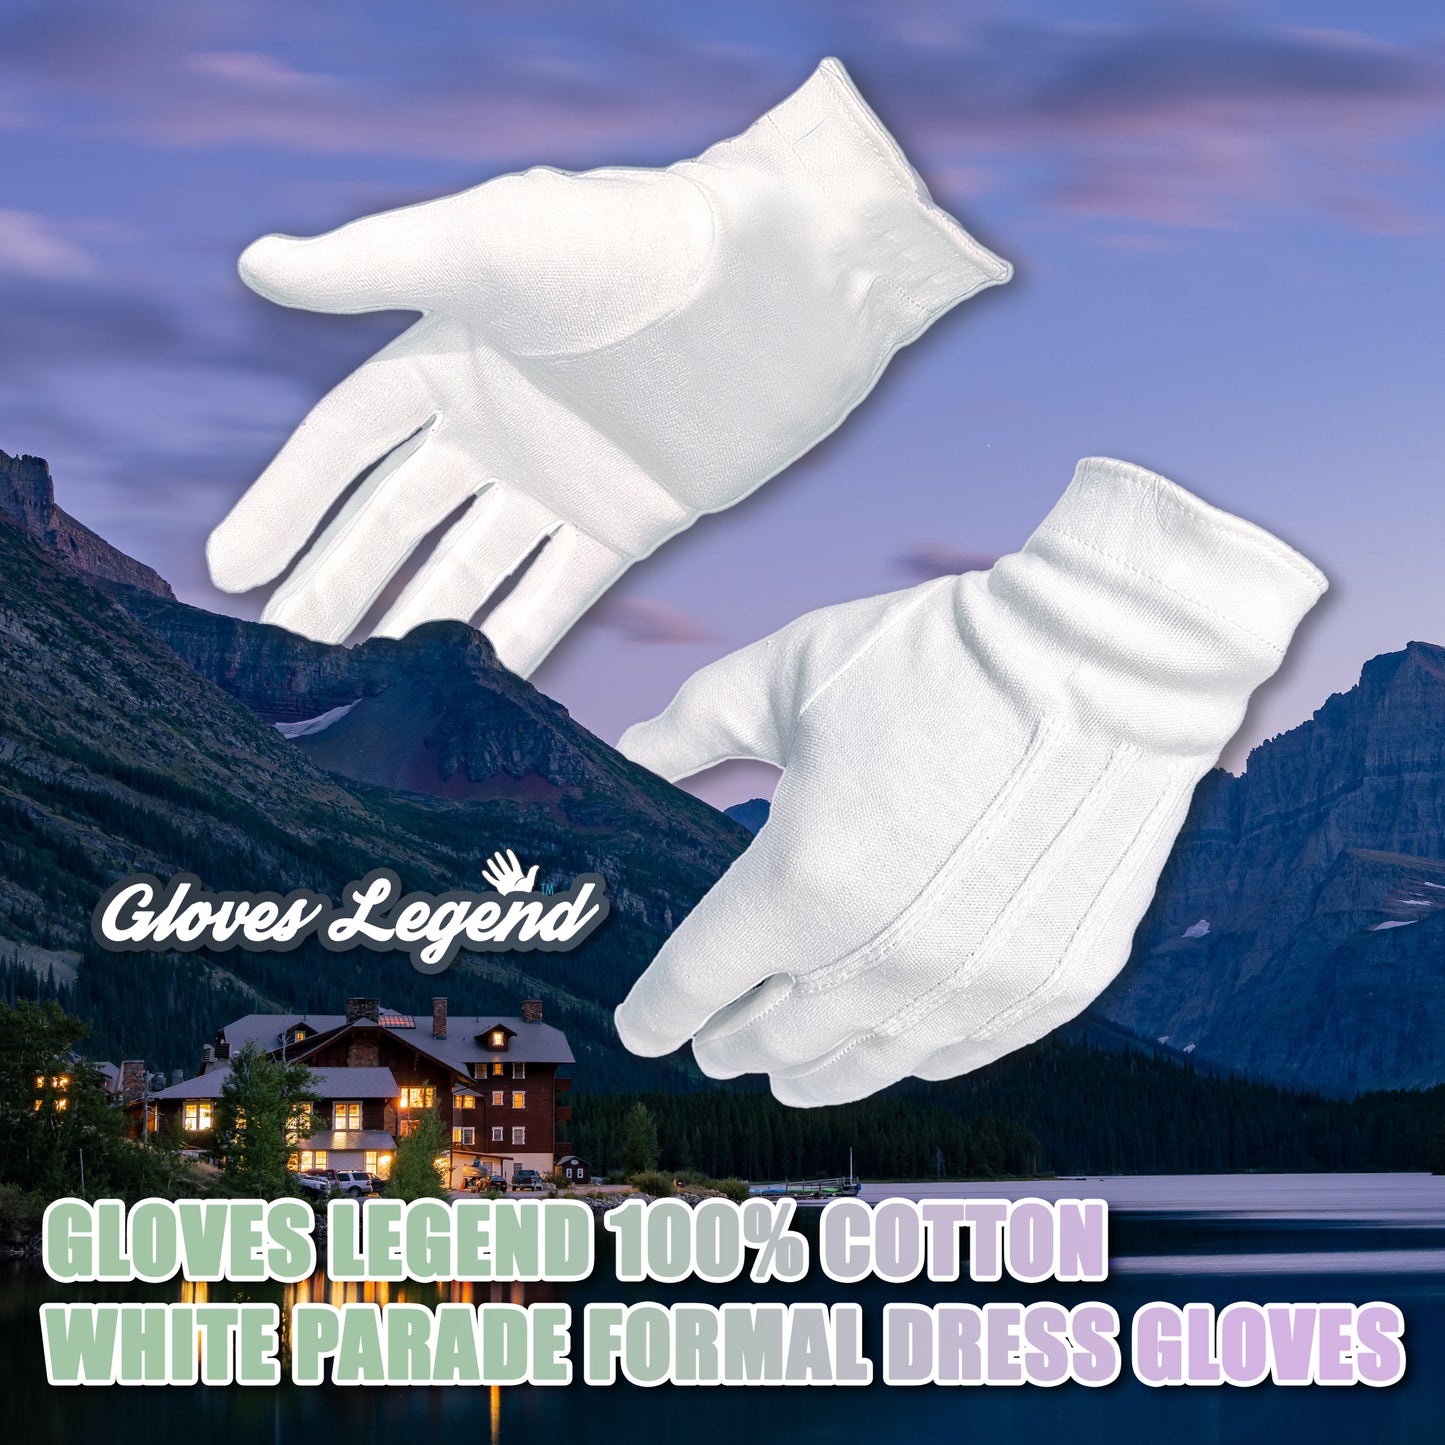 Size Large - 3 Pairs (6 Gloves) Gloves Legend 100% White Cotton Marching Parade Formal Dress Gloves